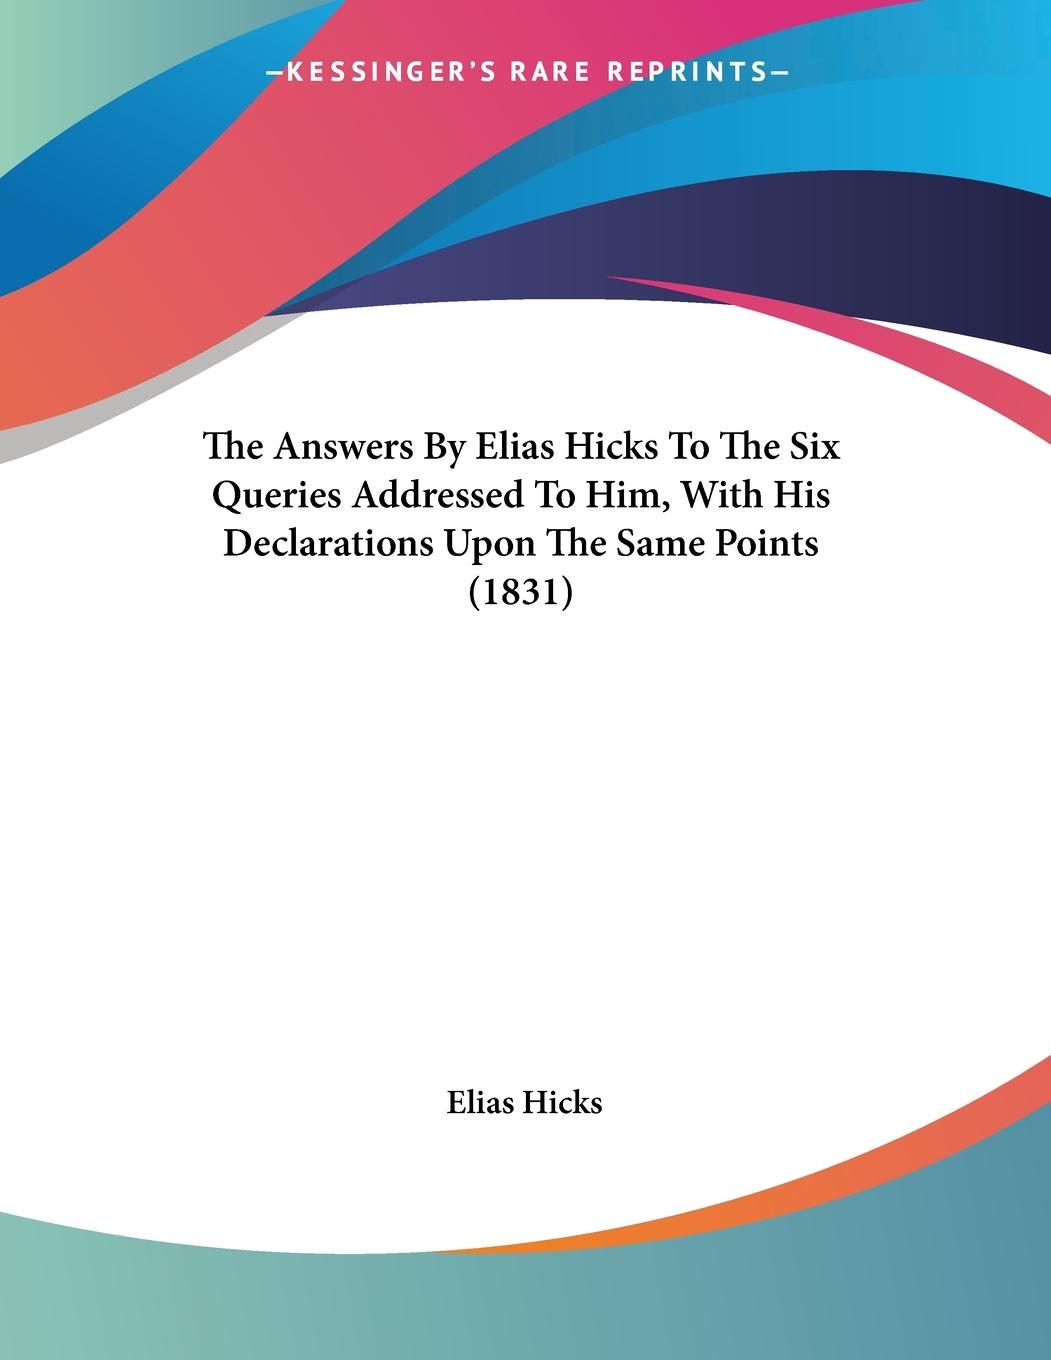 The Answers By Elias Hicks To The Six Queries Addressed To Him, With His Declarations Upon The Same Points (1831) - Hicks, Elias